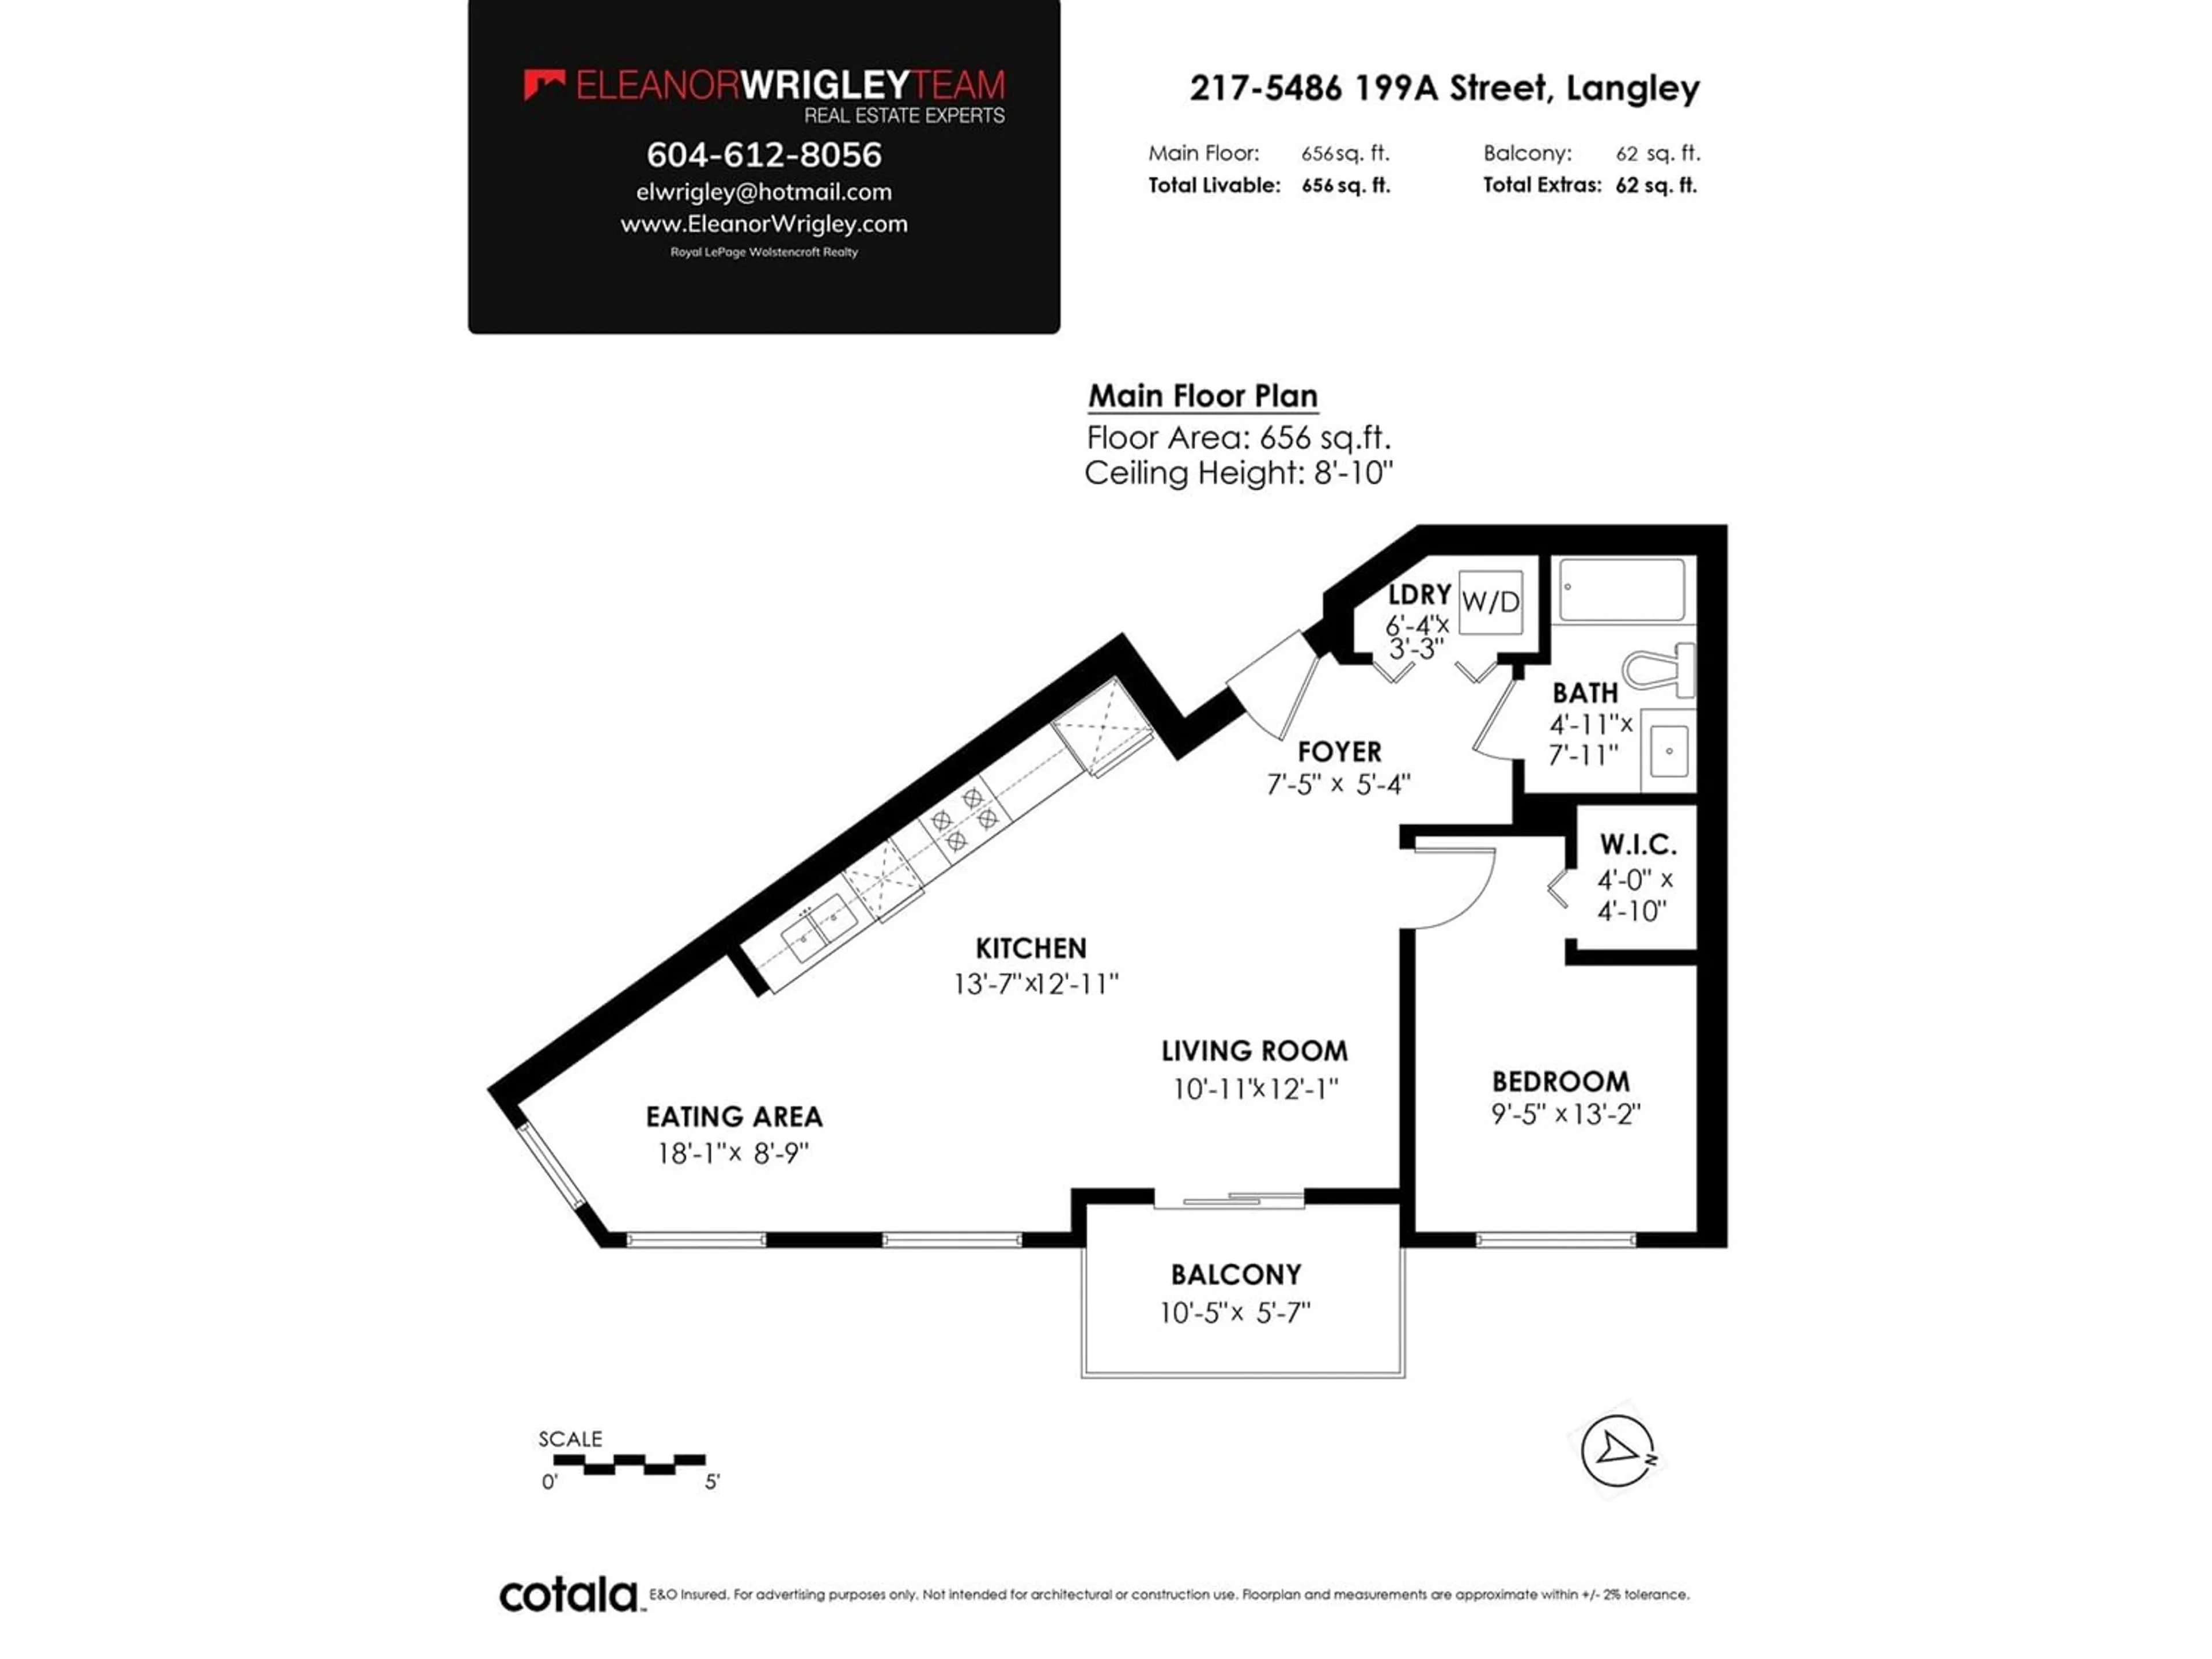 Floor plan for 217 5486 199A STREET, Langley British Columbia V3A0N6